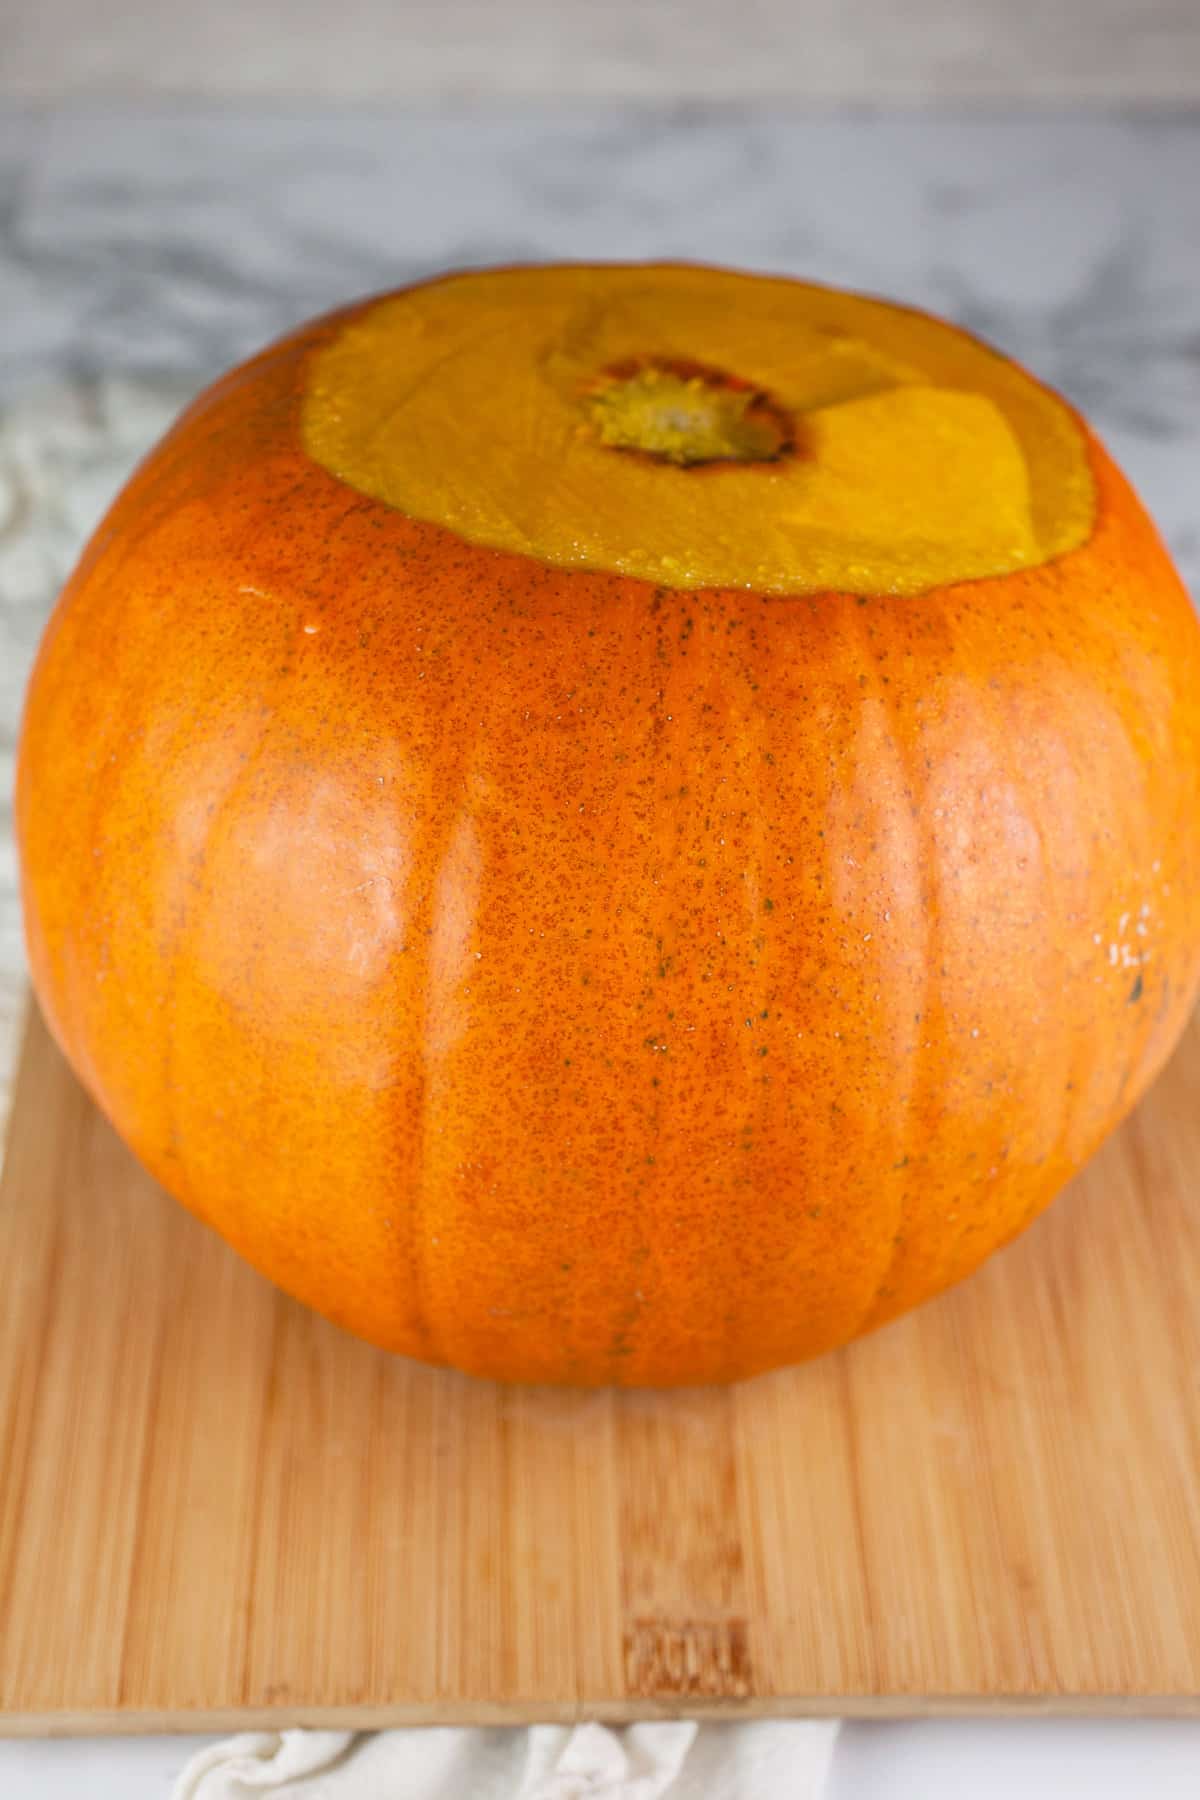 Pumpkin with stem removed on wooden cutting board.